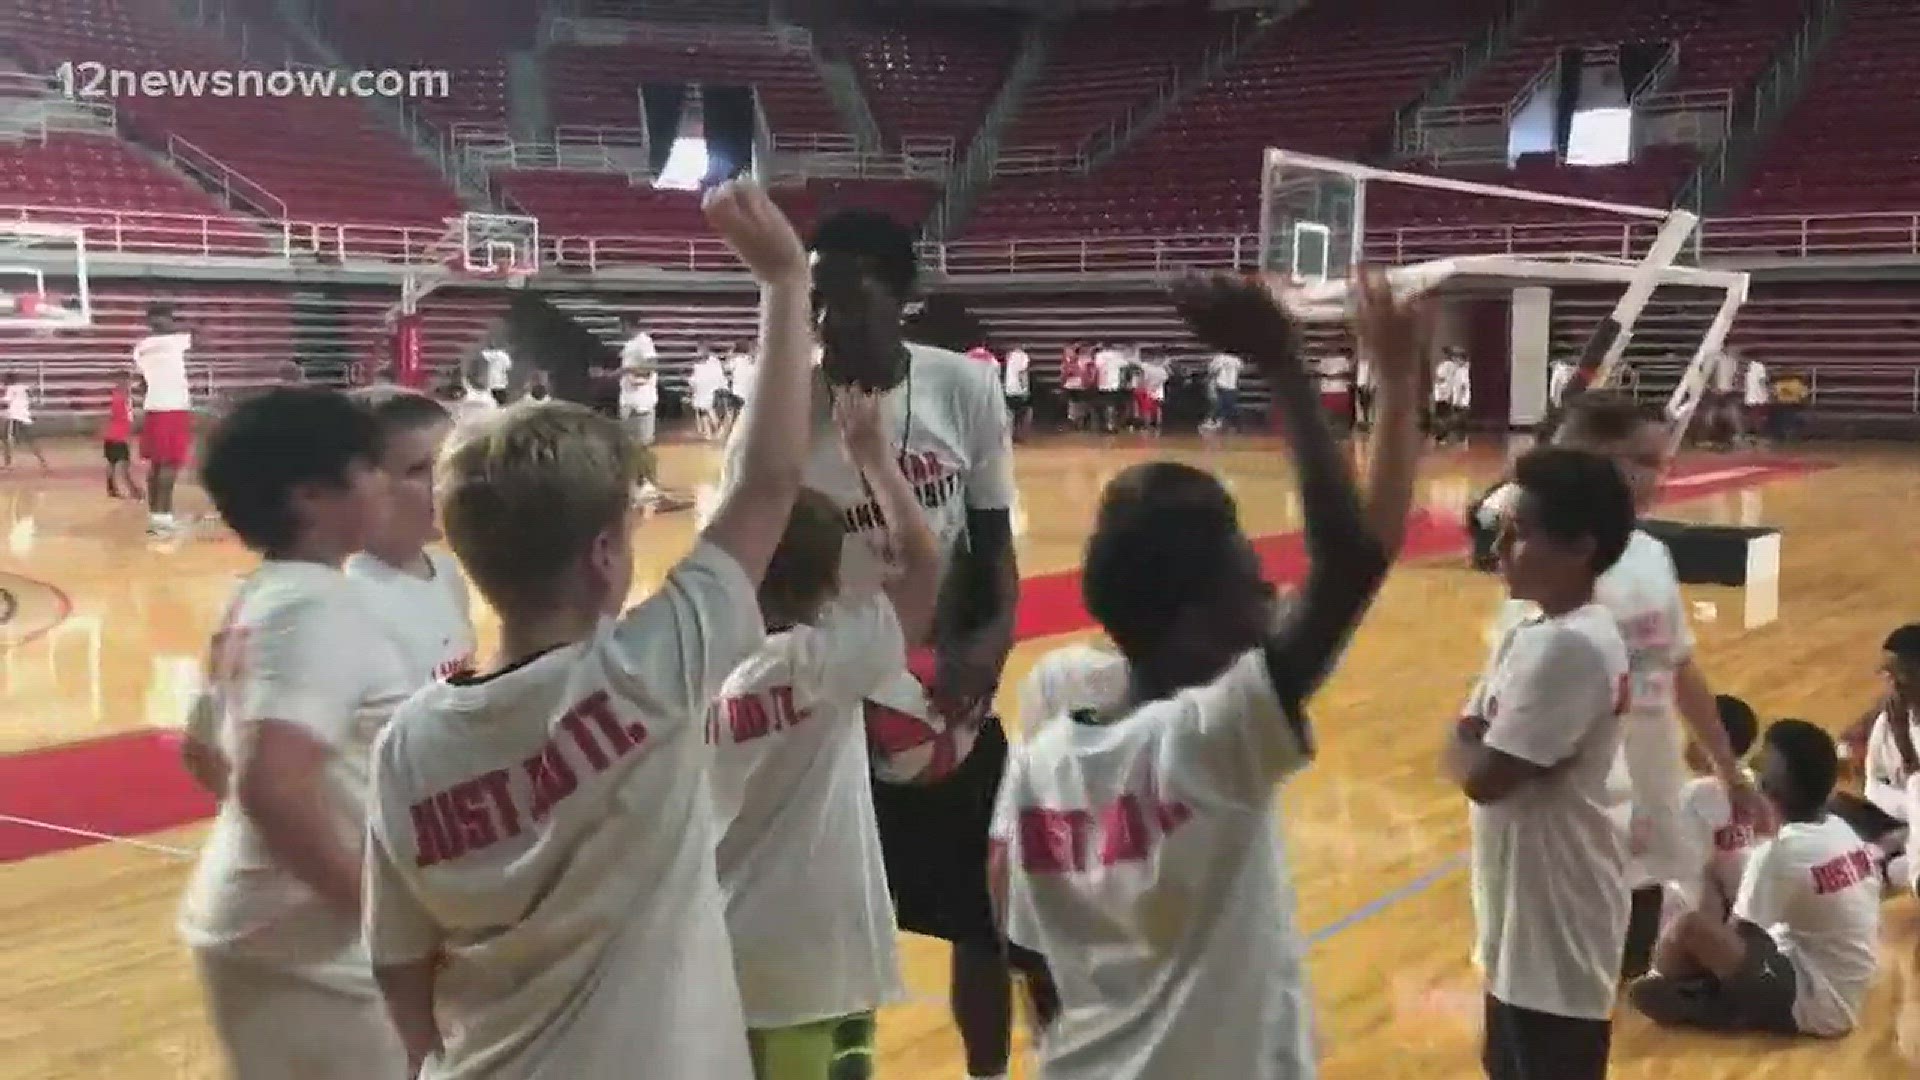 Laquarious Paige is back home to play for Lamar, but first, he's going to spend his summer teaching local kids how to play basketball.